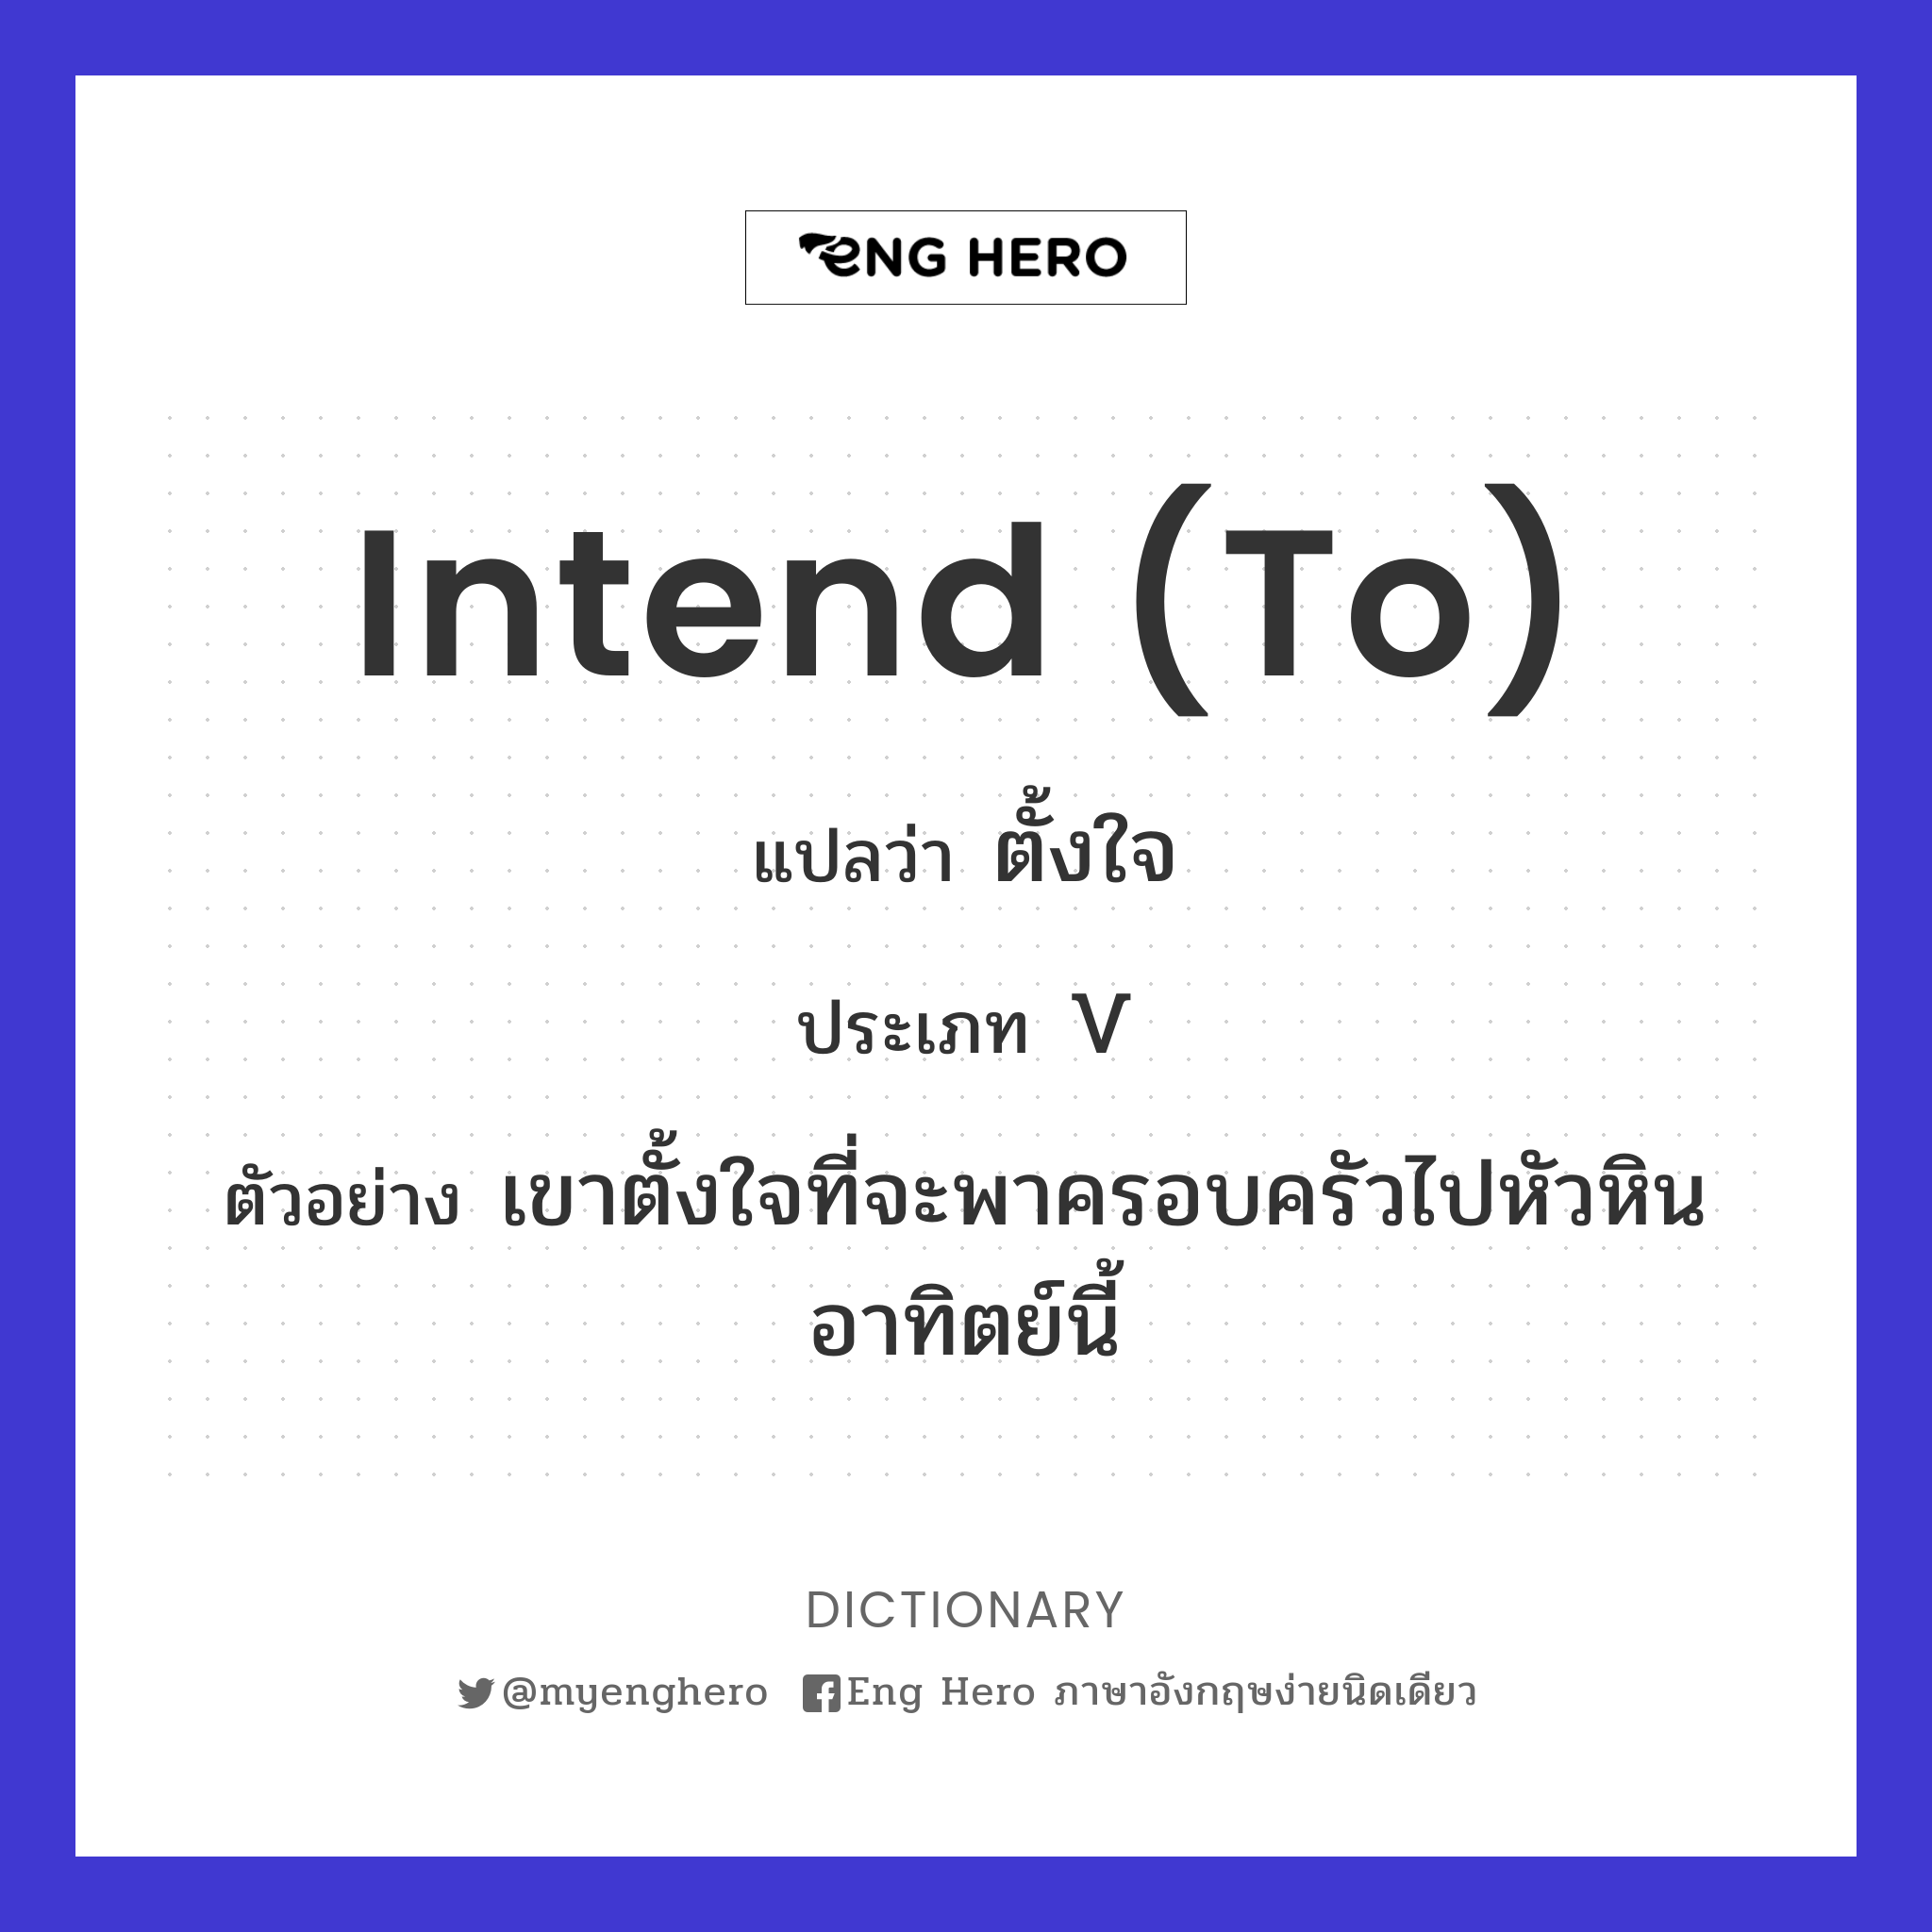 intend (to)